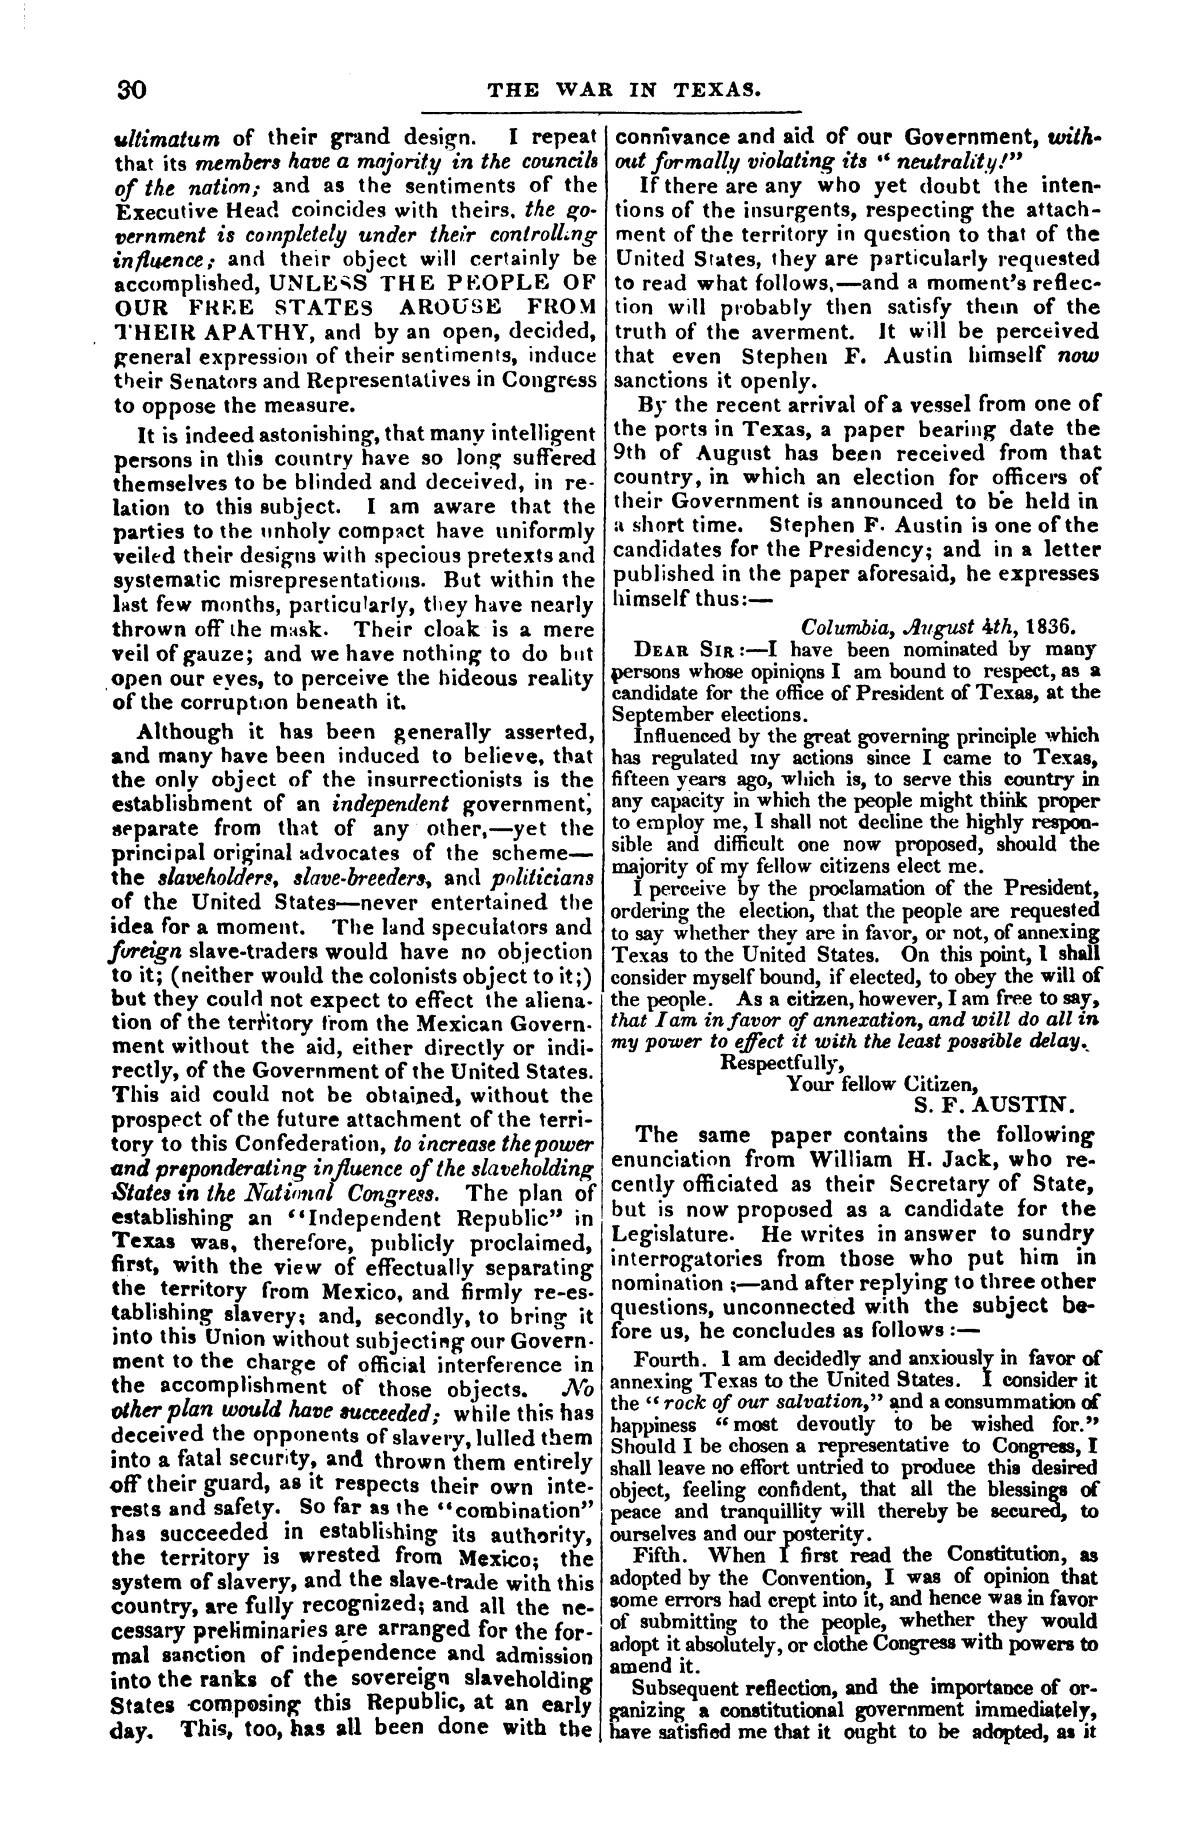 The War in Texas; A Review of Facts and Circumstances, showing that this contest is a Crusade Against Mexico, set on foot by Slaveholders, Land Speculators, &c. In Order to Re-Establish, Extend, and Perpetuate the System of Slavery and the Slave Trade.
                                                
                                                    [Sequence #]: 30 of 64
                                                